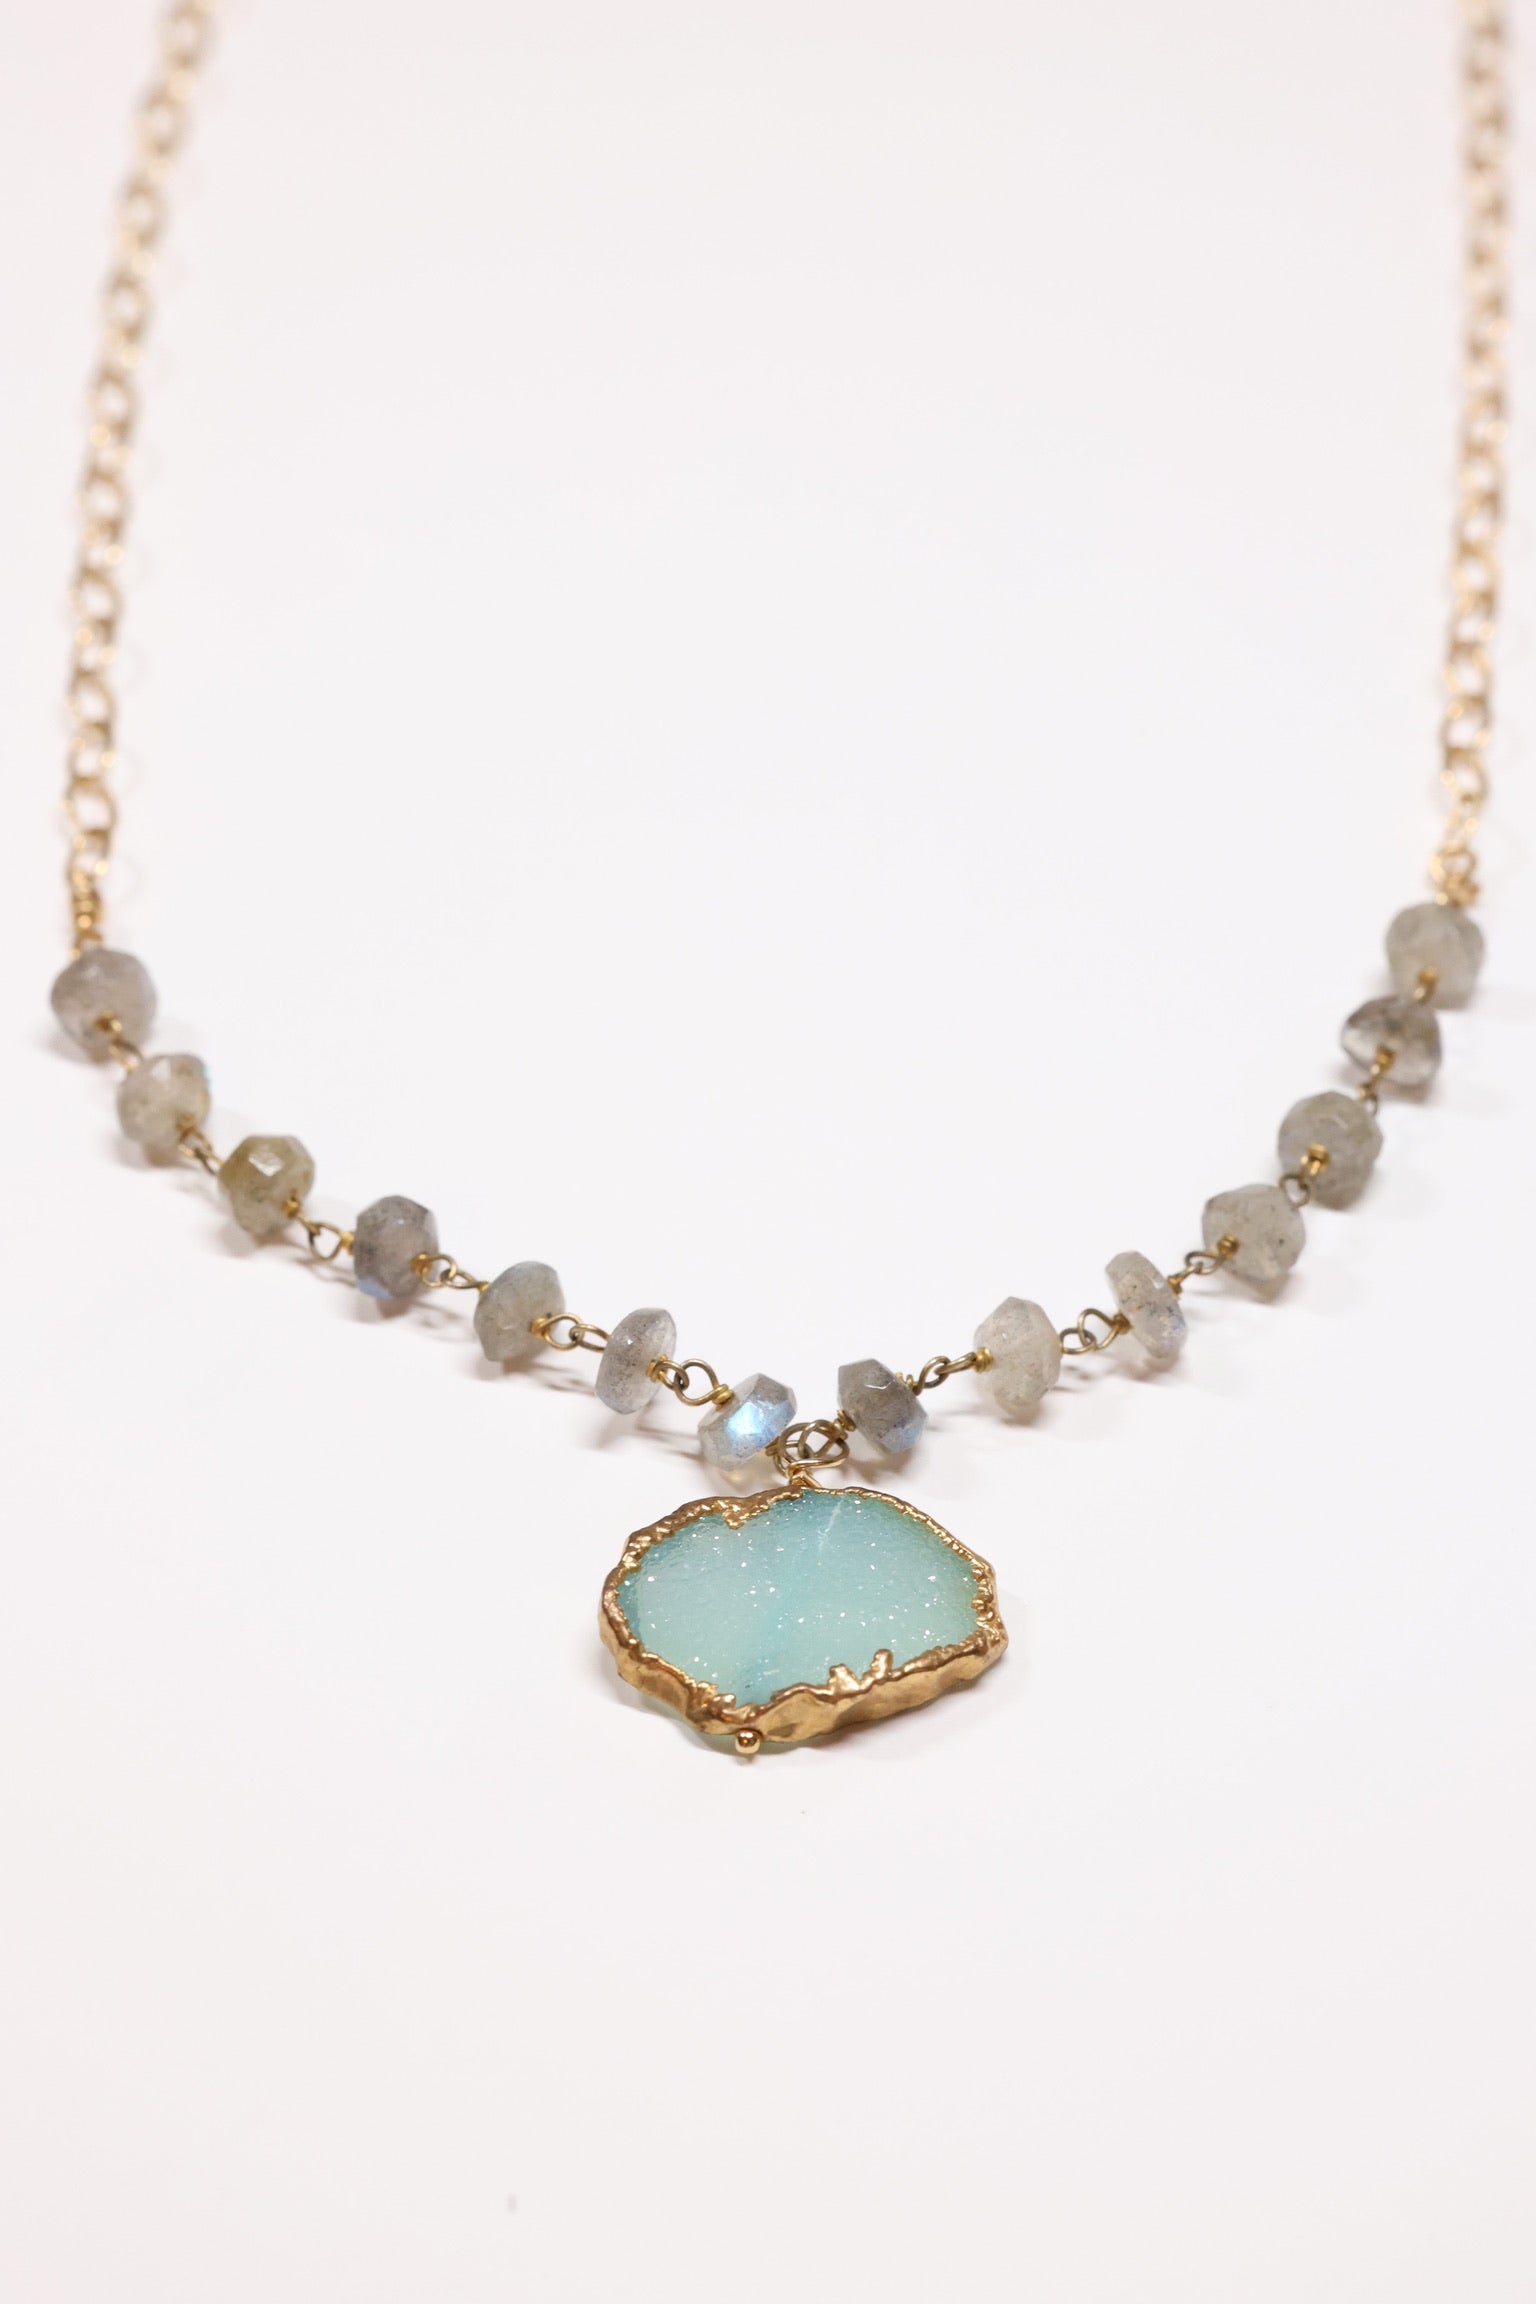 Necklace centered with labradorite on each side